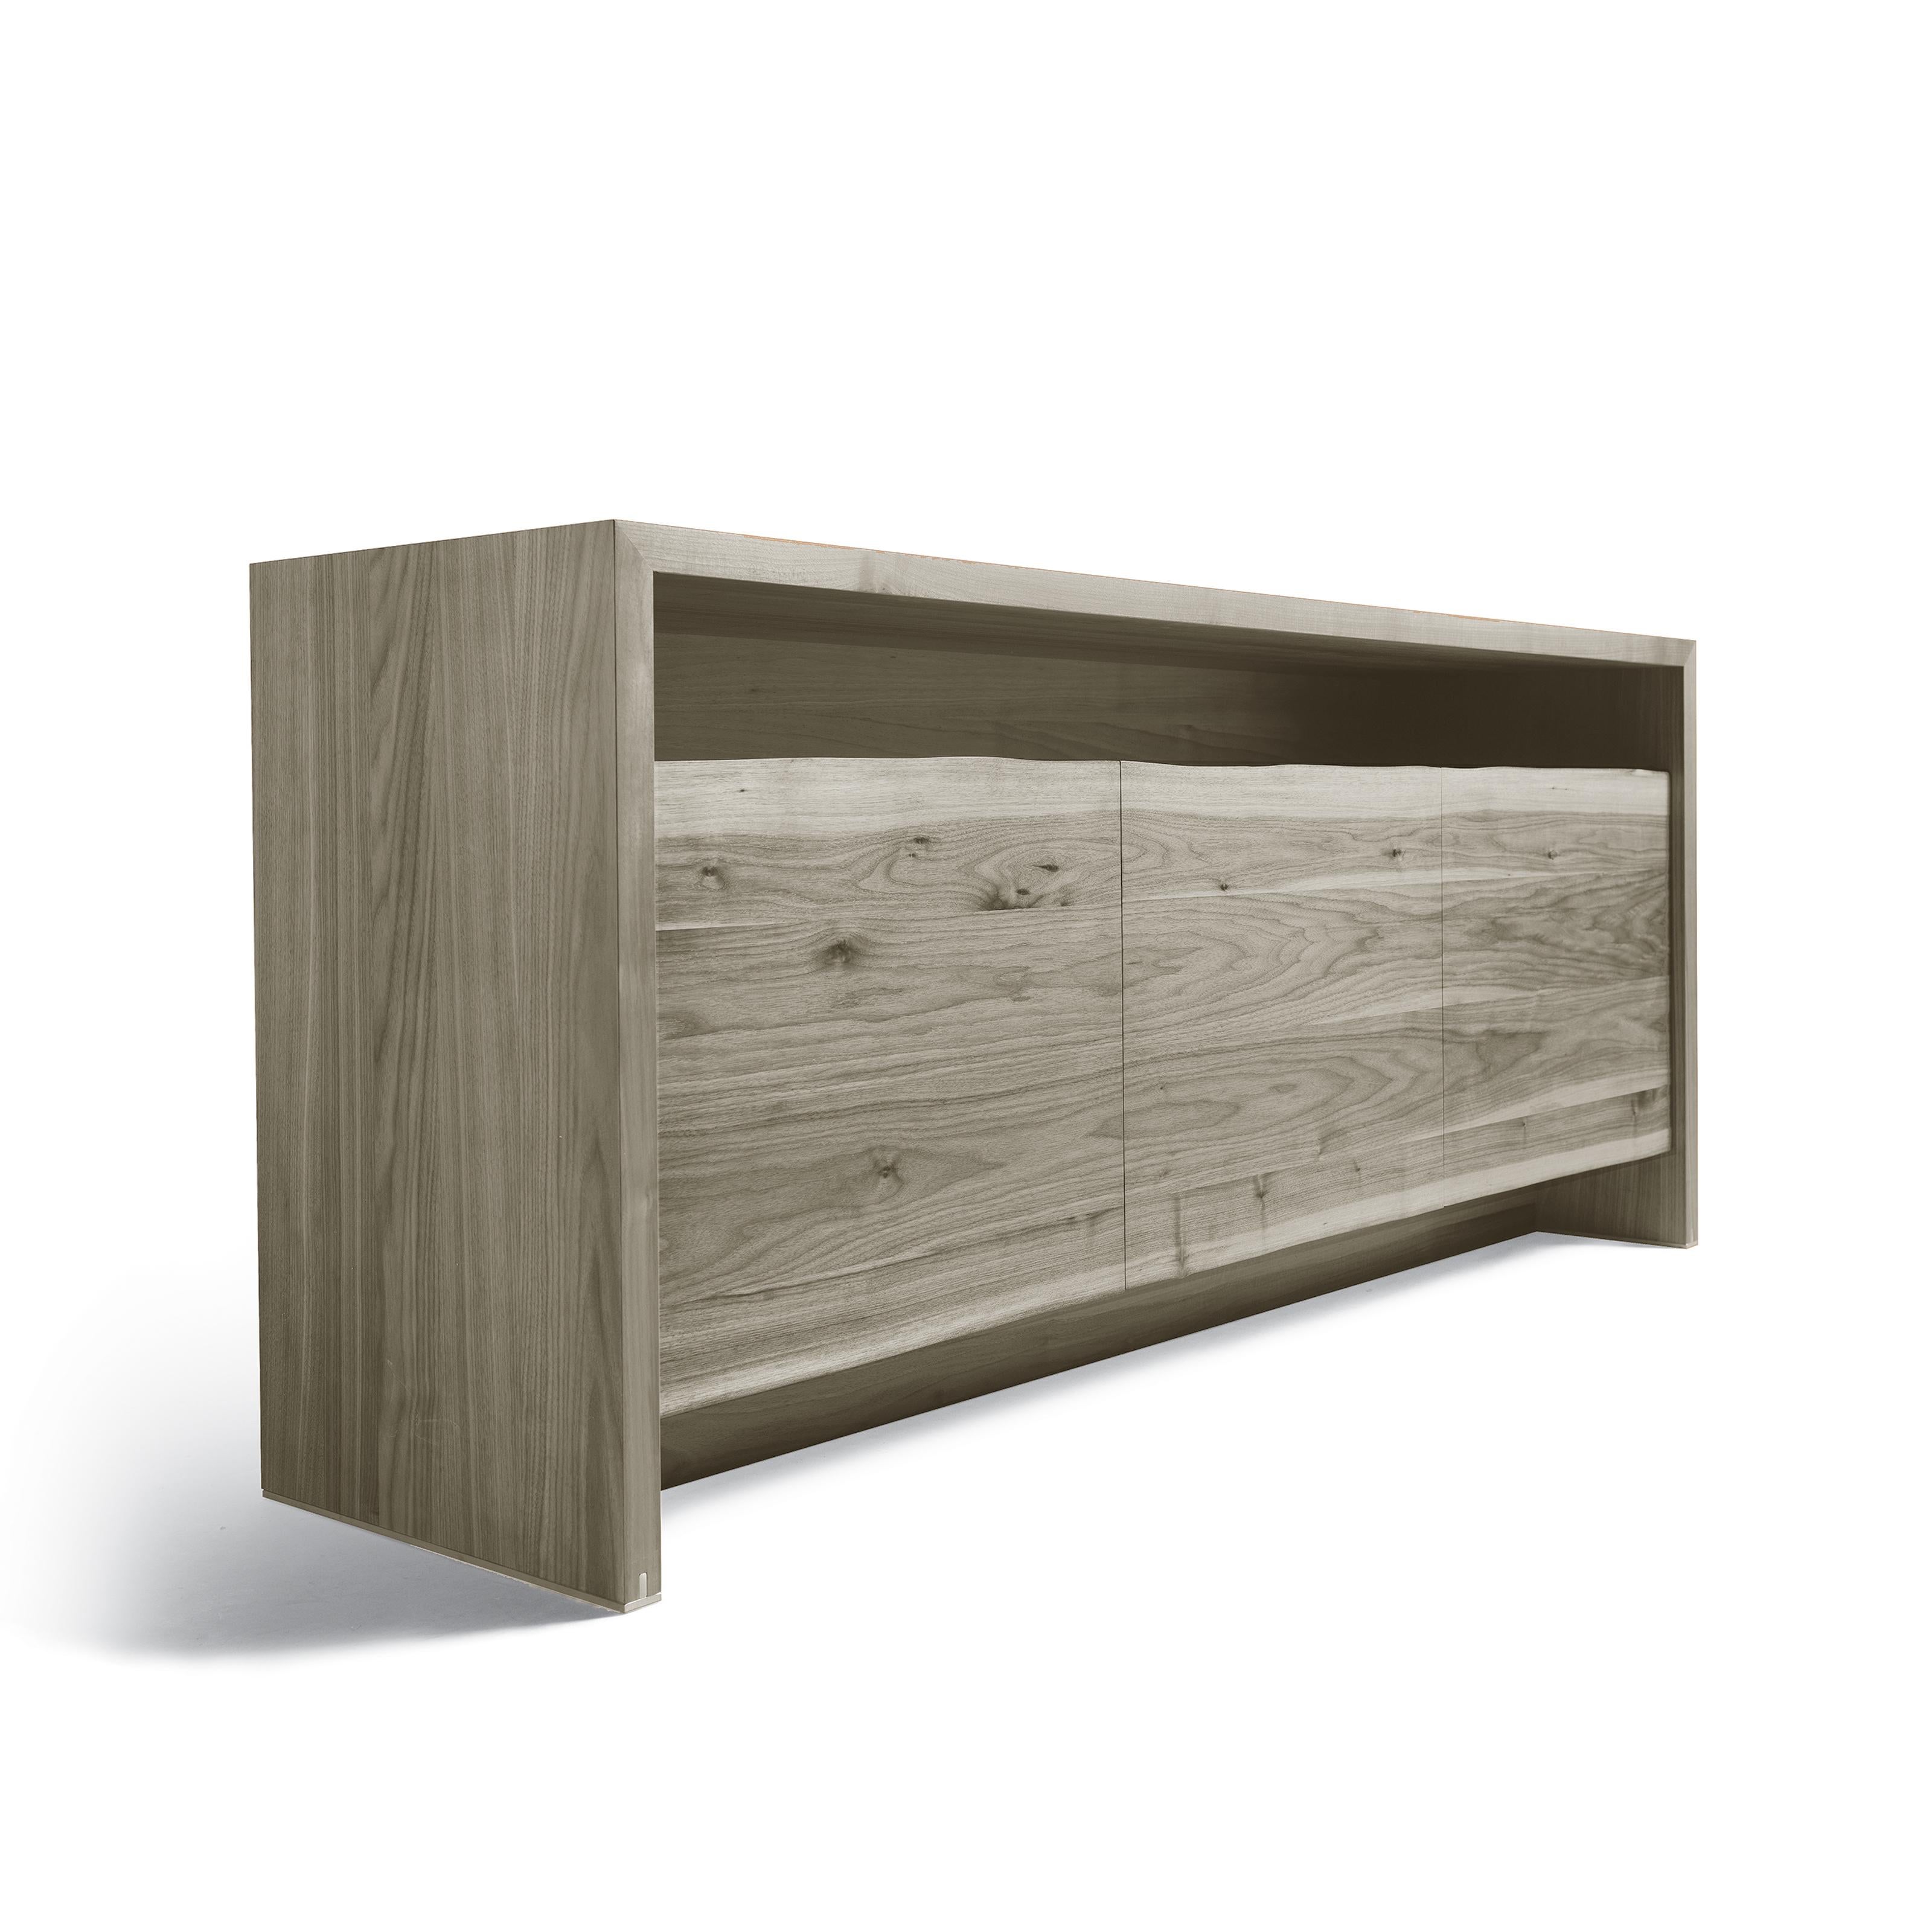 Handcrafted in Italy with passion and expertise, the Puraforma solid wood sideboard combines aesthetic solutions with a sophisticated design. The doors in debarked wood highlight the oblique cut through the chromatic difference of the walnut